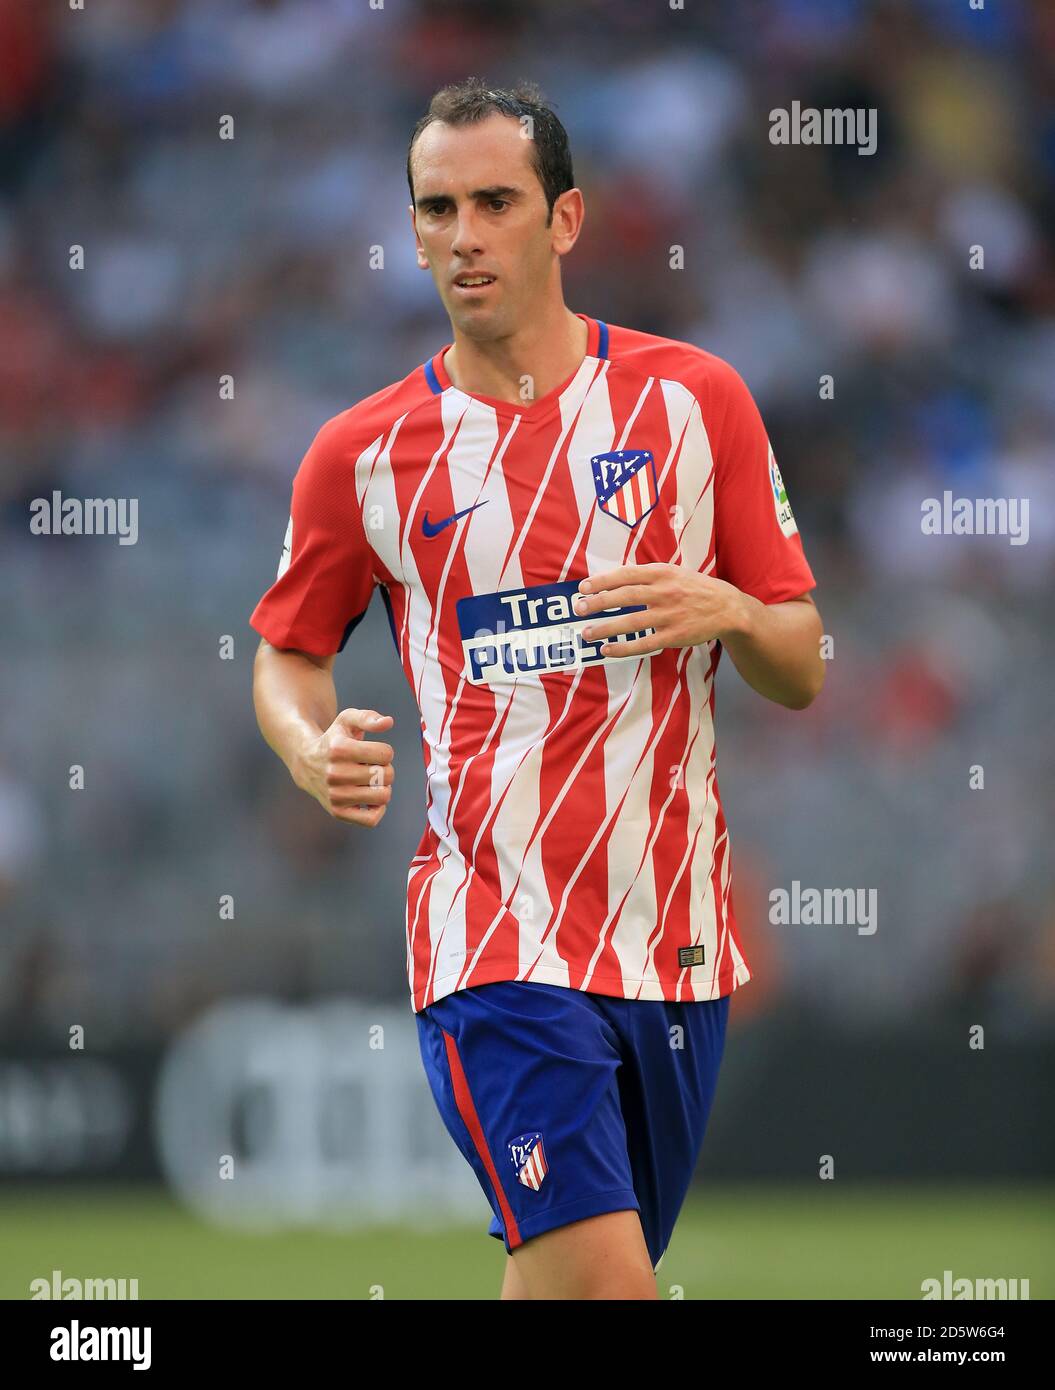 Atletico Madrid's Diego Godin during the match Stock Photo